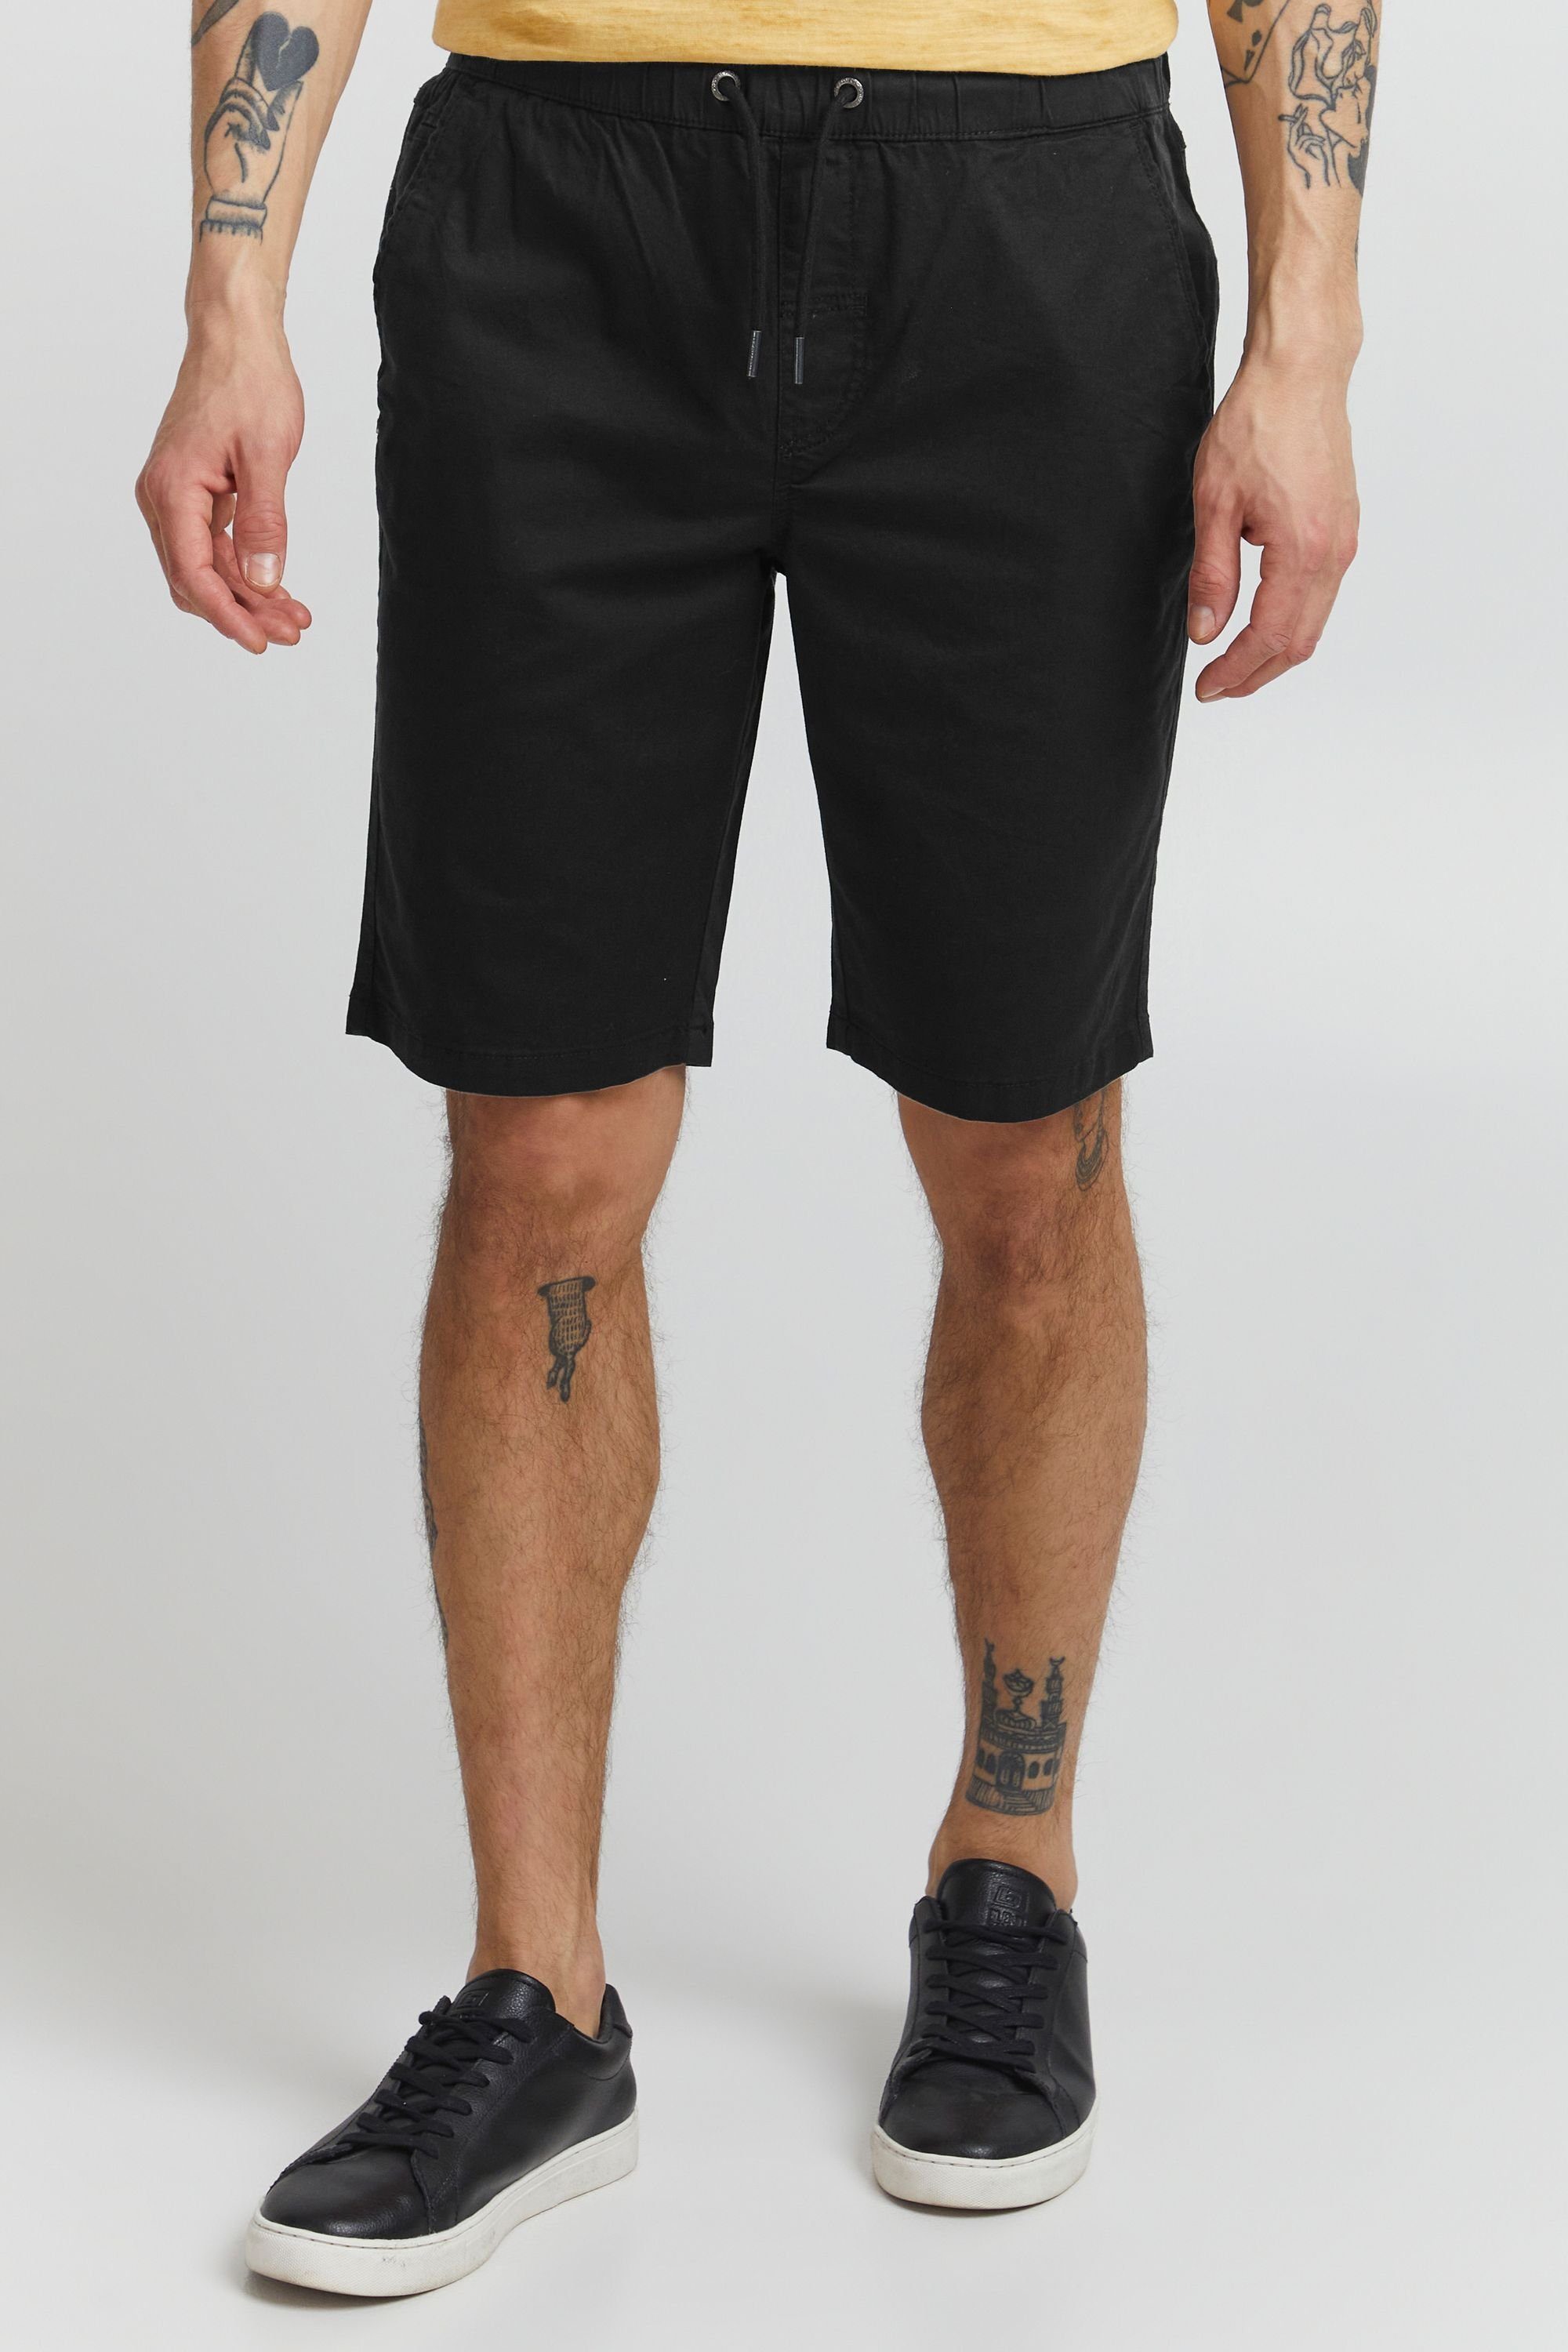 Project 11 Project Black PRLuno Shorts 11